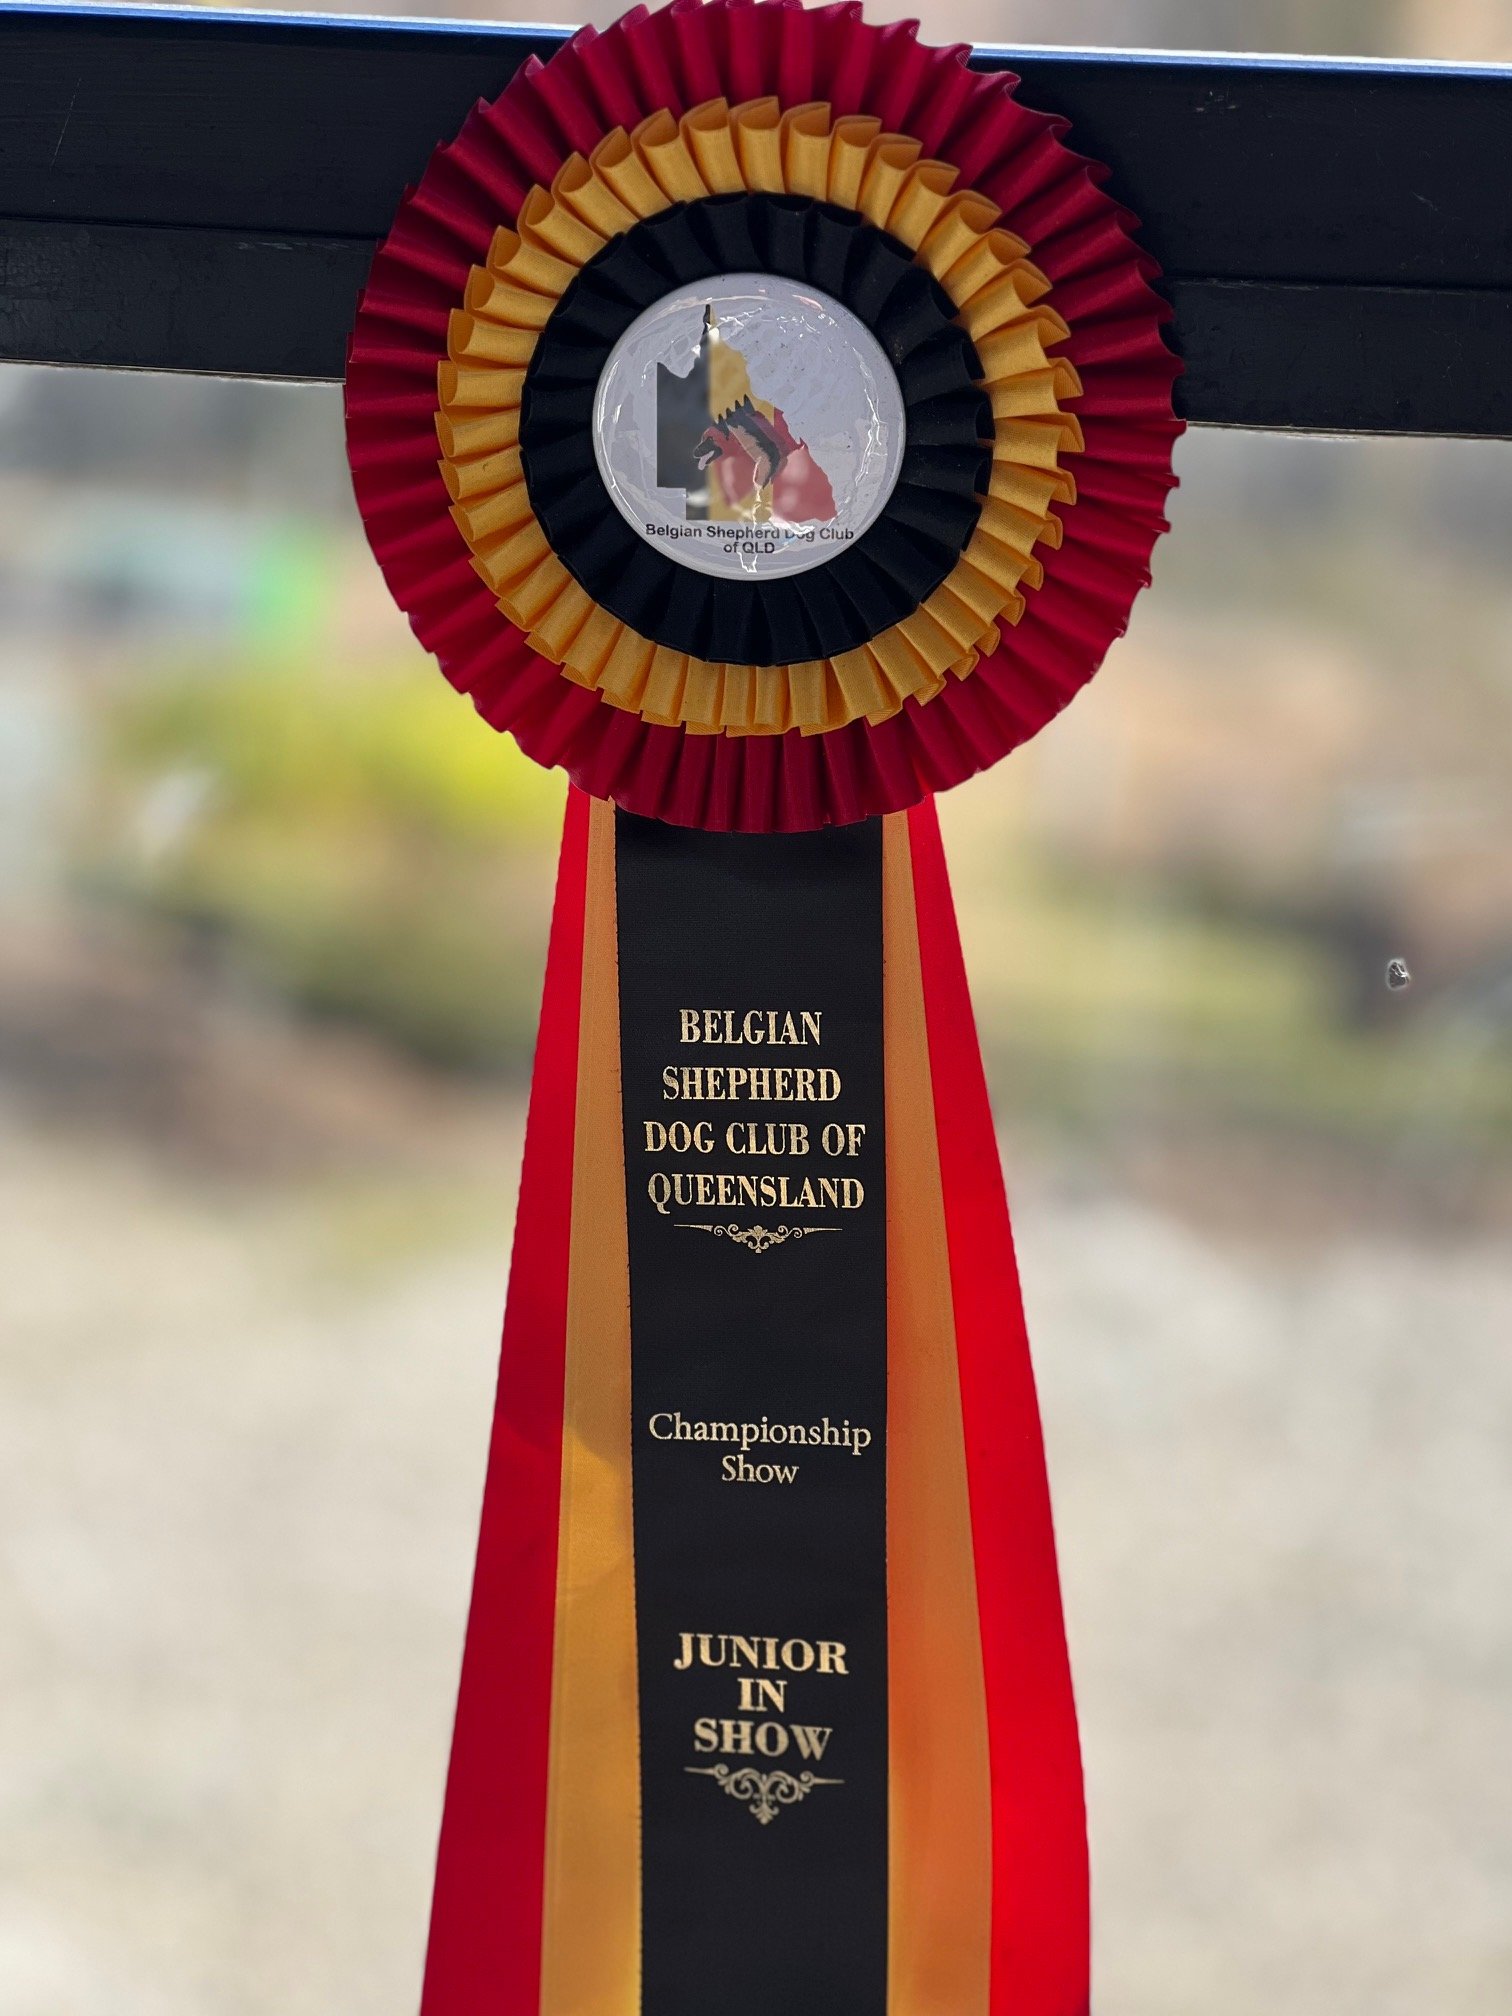 The Best Junior in Show rosette that was won by Maddie